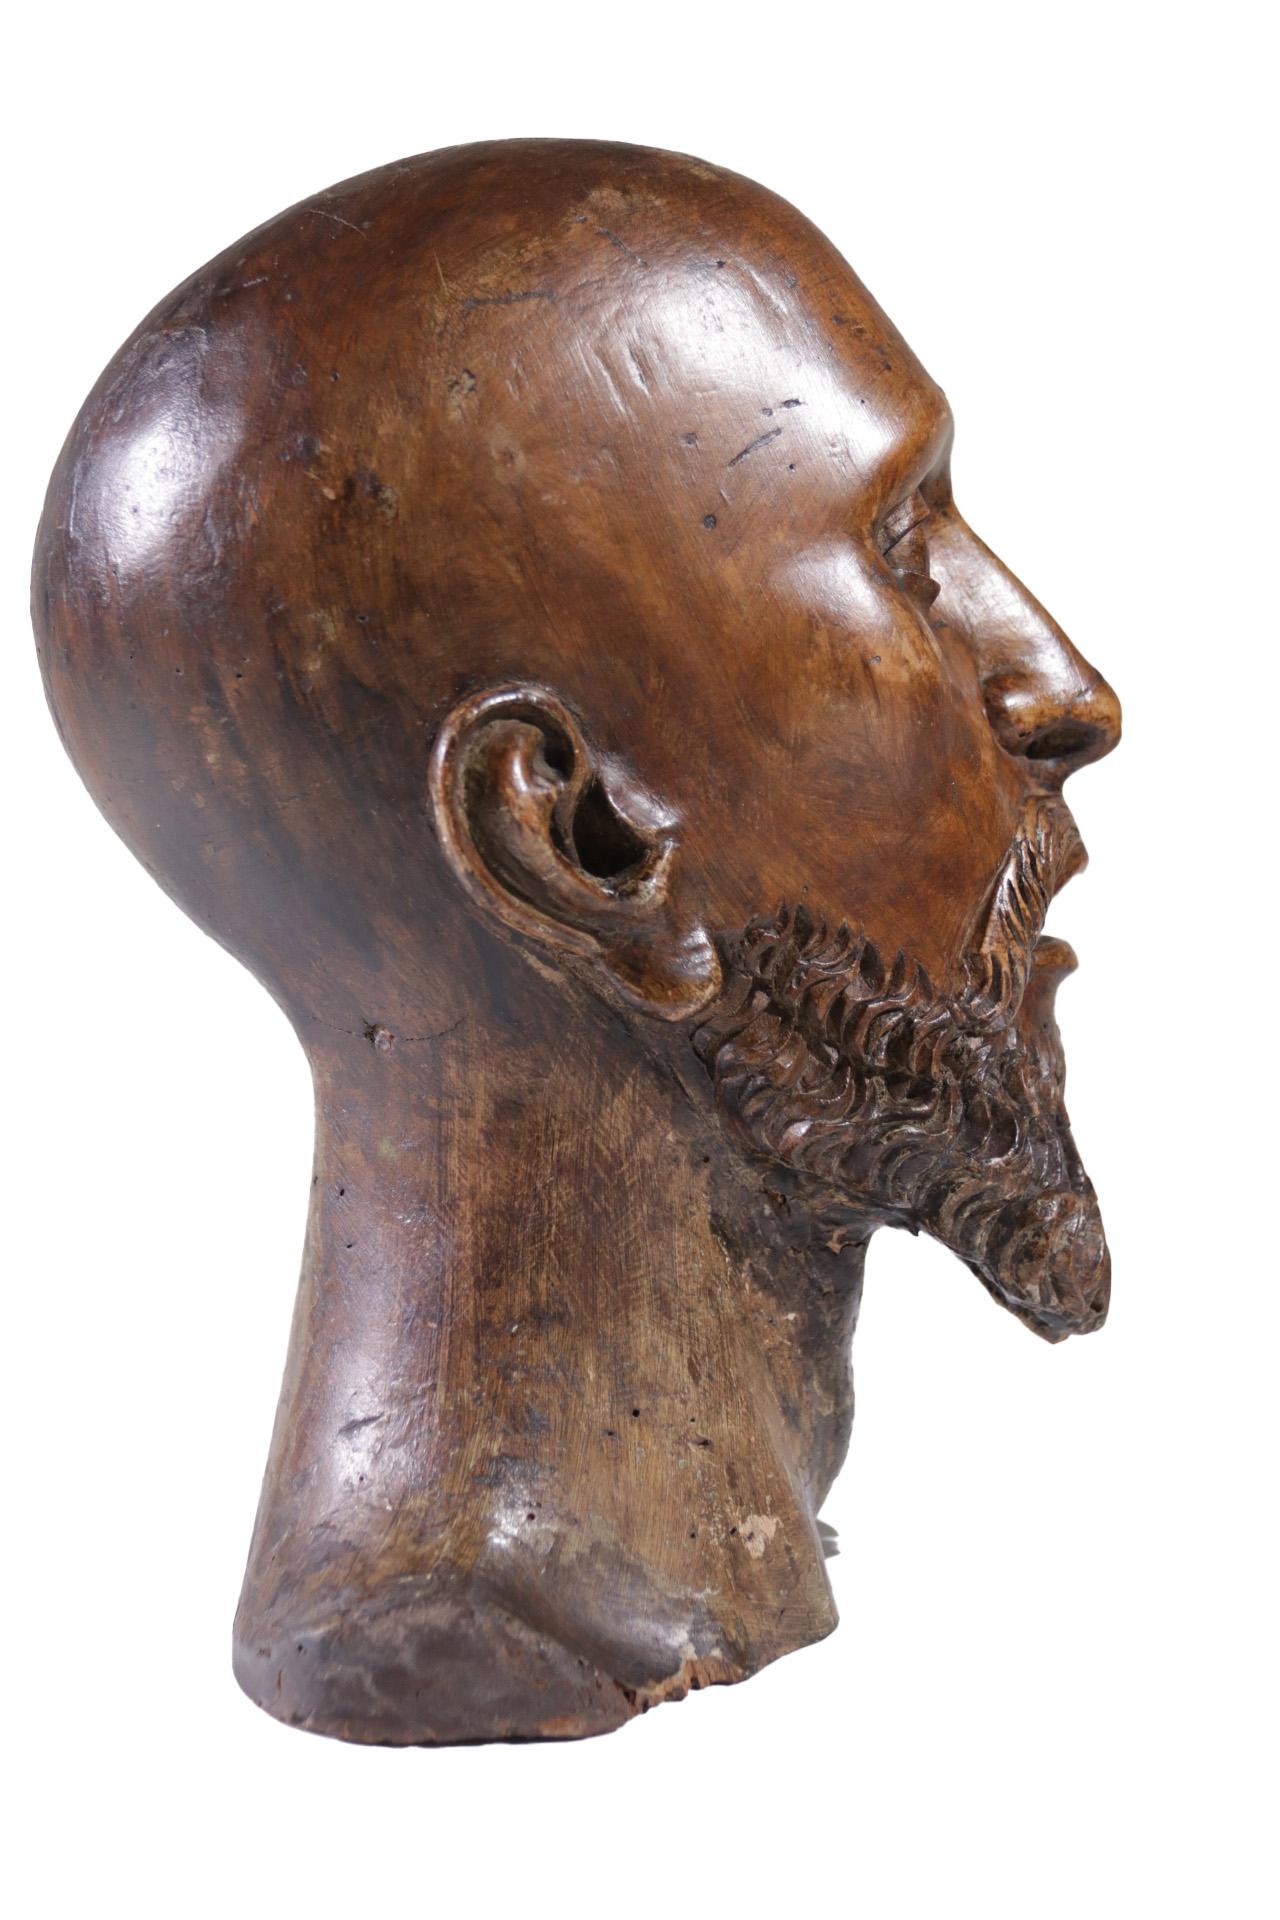 Life-Size Carved Wood Sculpture of a Man's Head circa 1700 South European In Good Condition For Sale In Boven Leeuwen, NL